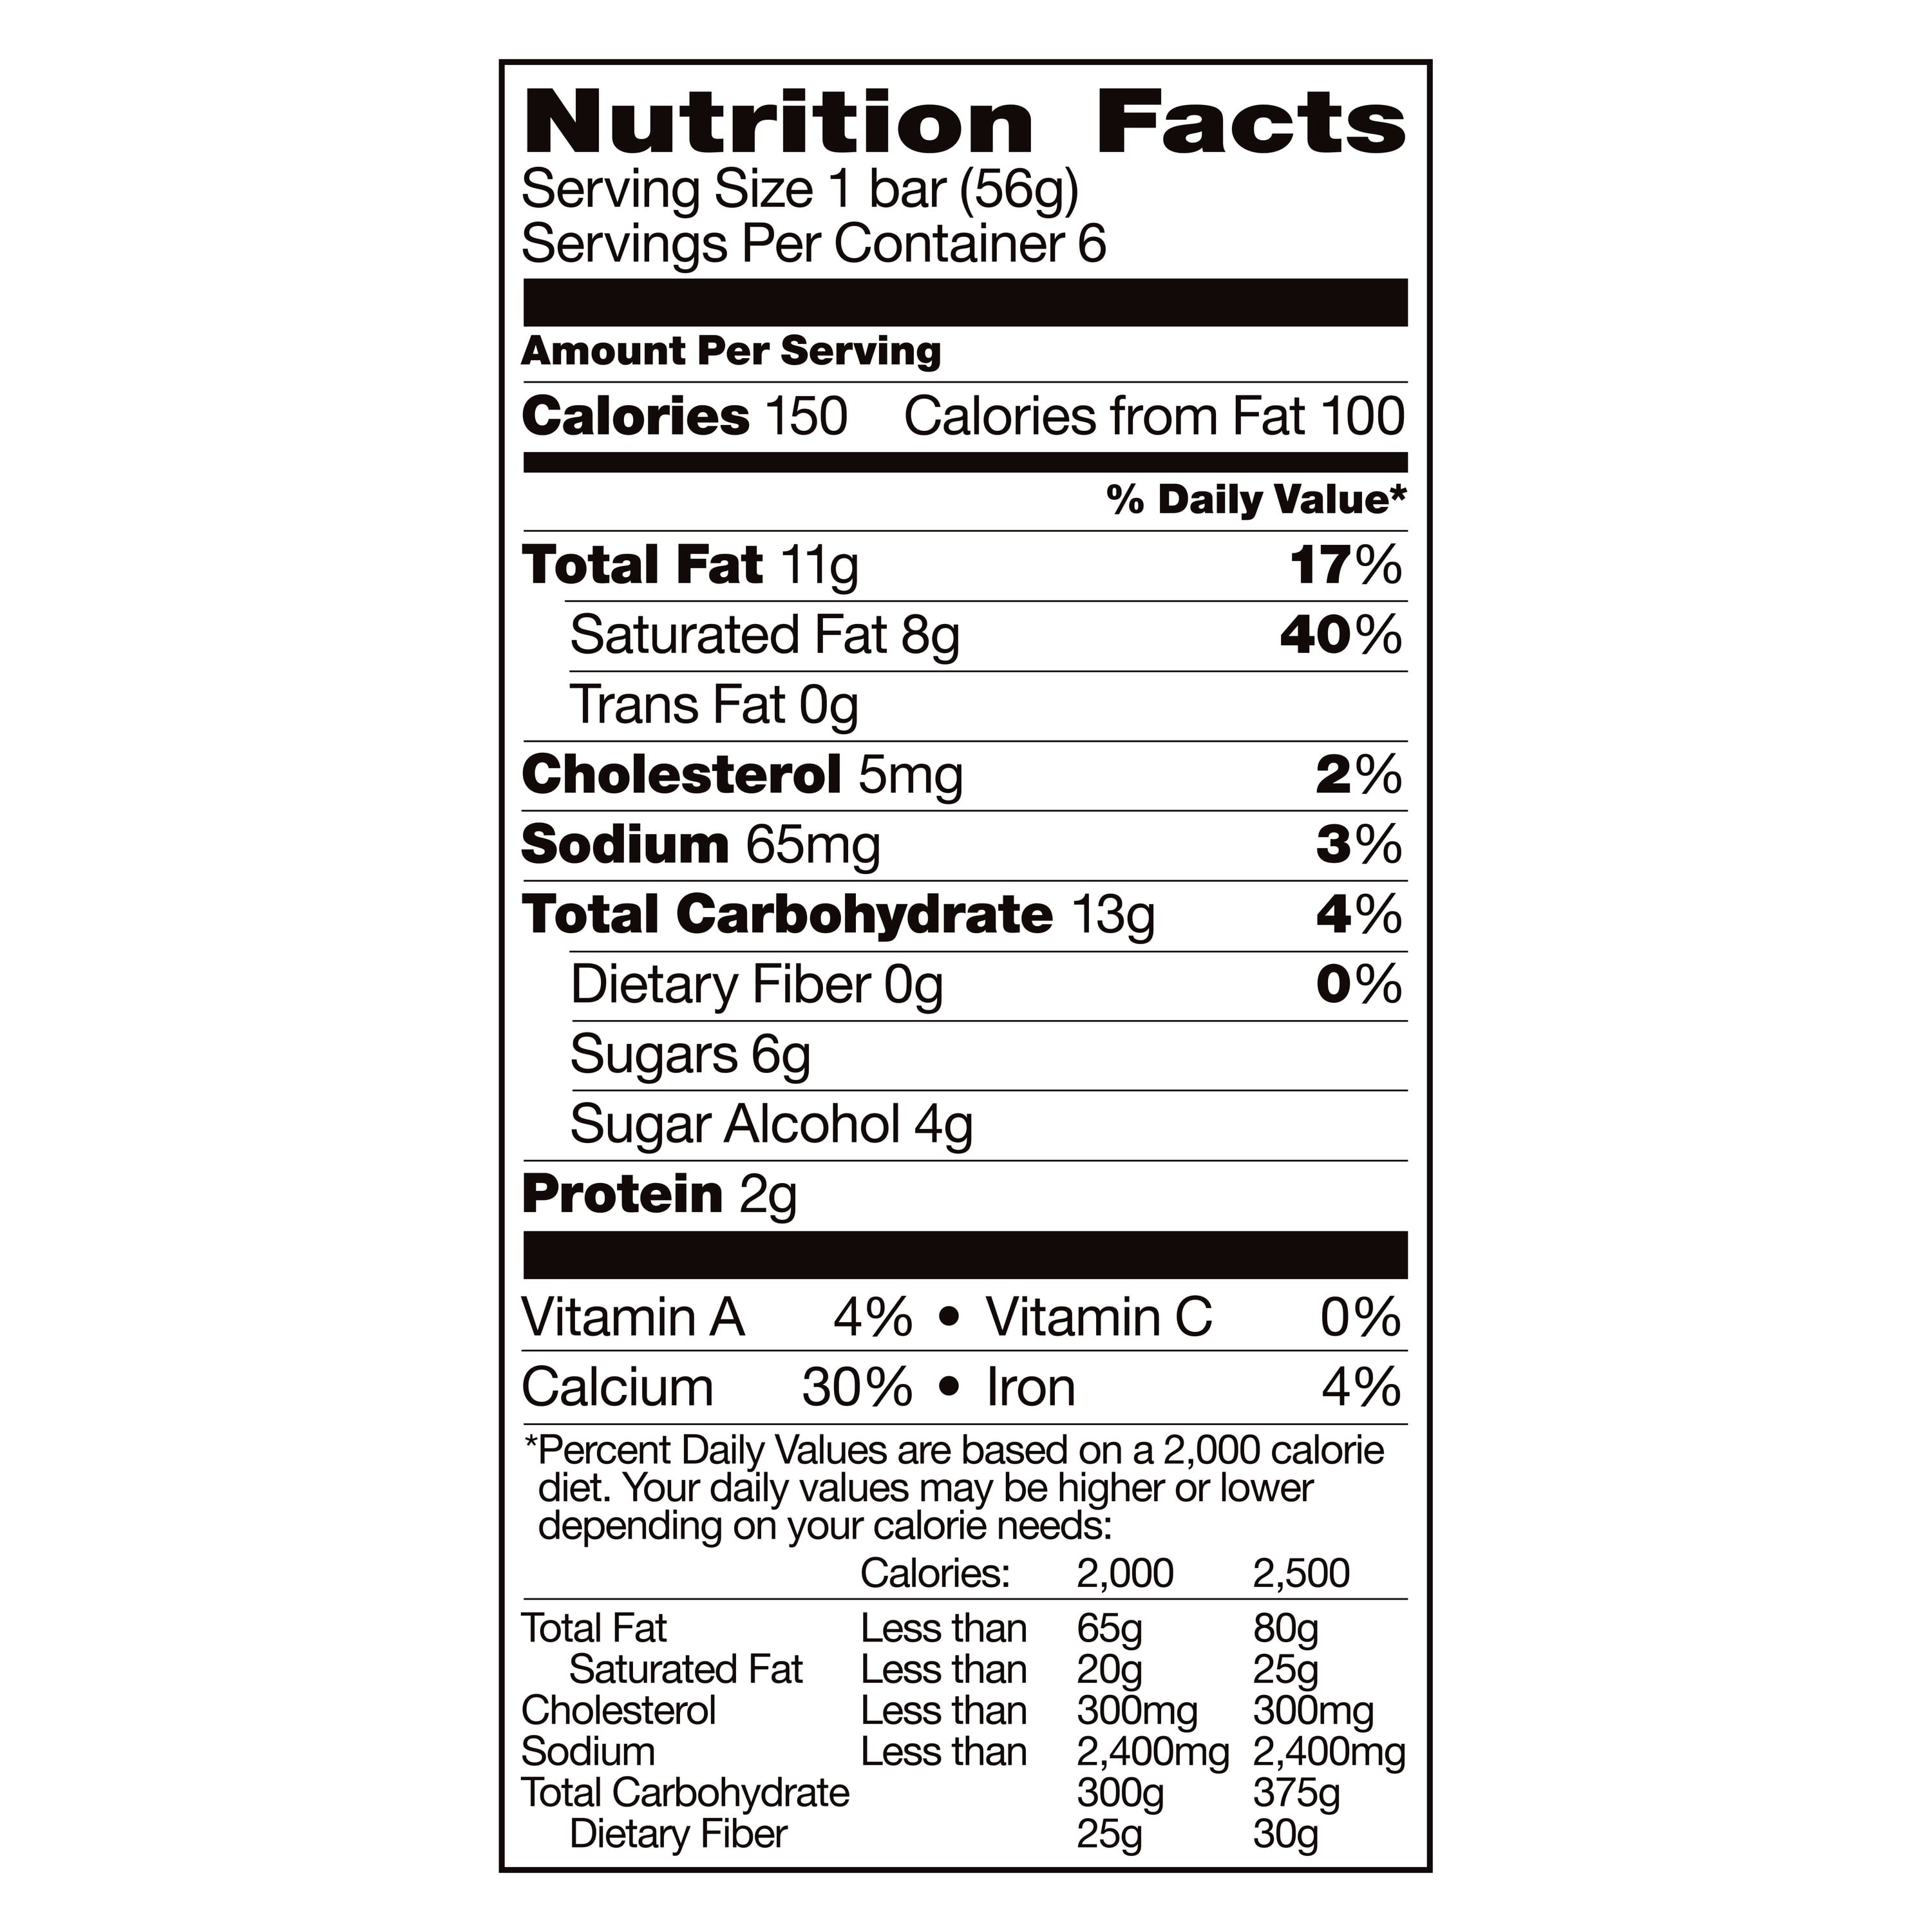 2. Serving Size